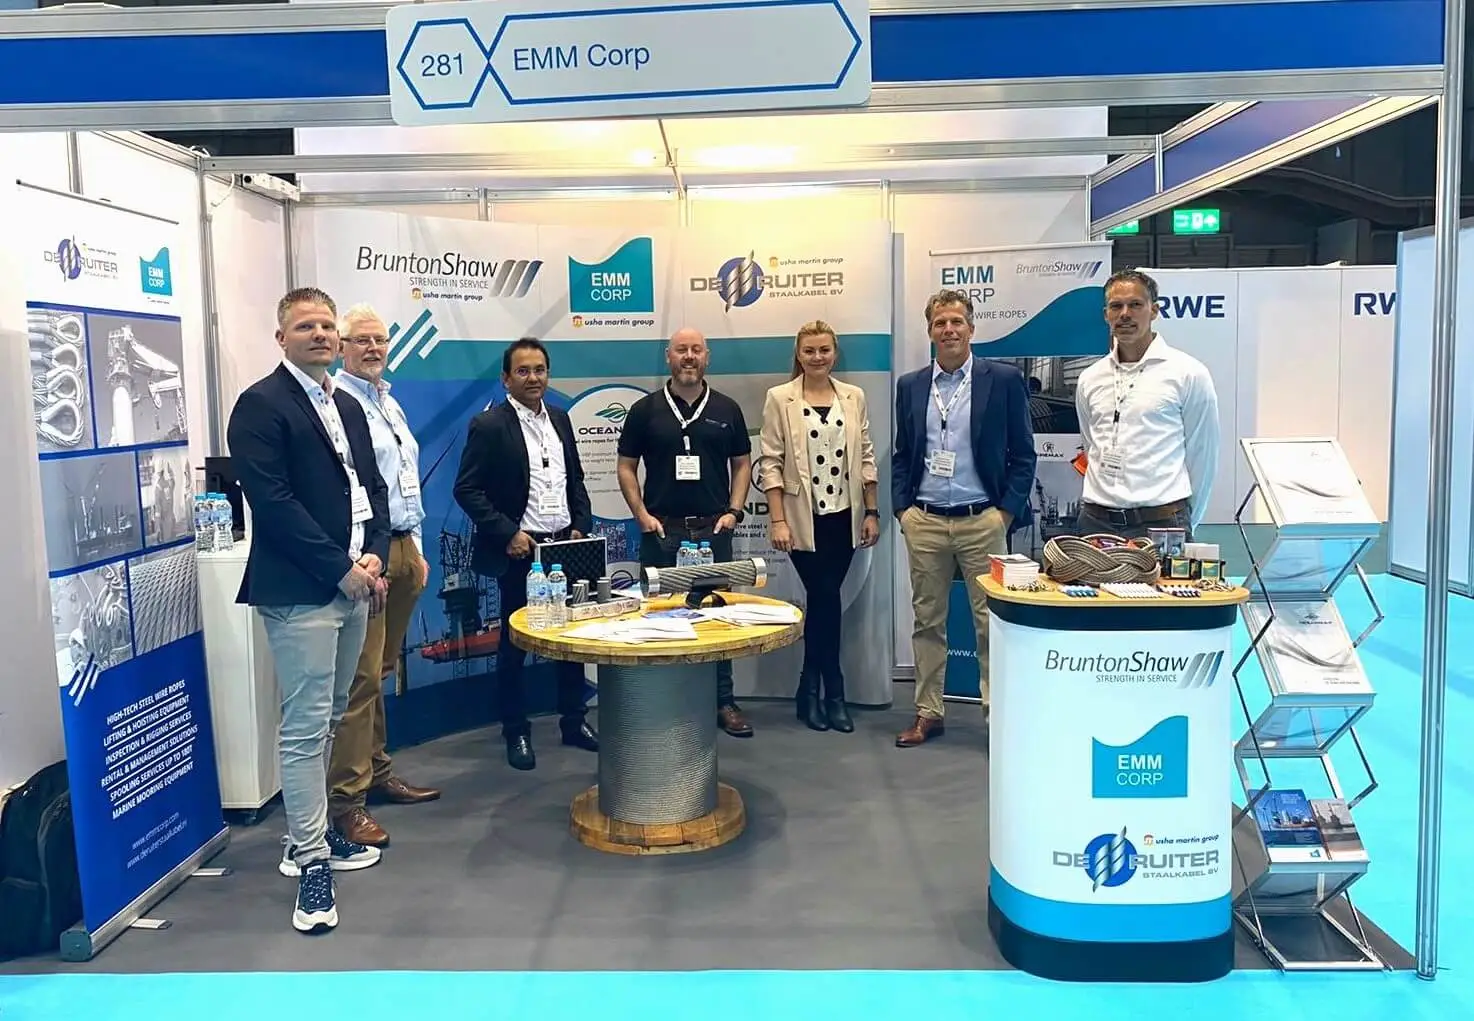 Our UK operations exhibited at the Global Offshore Wind Expo 2022